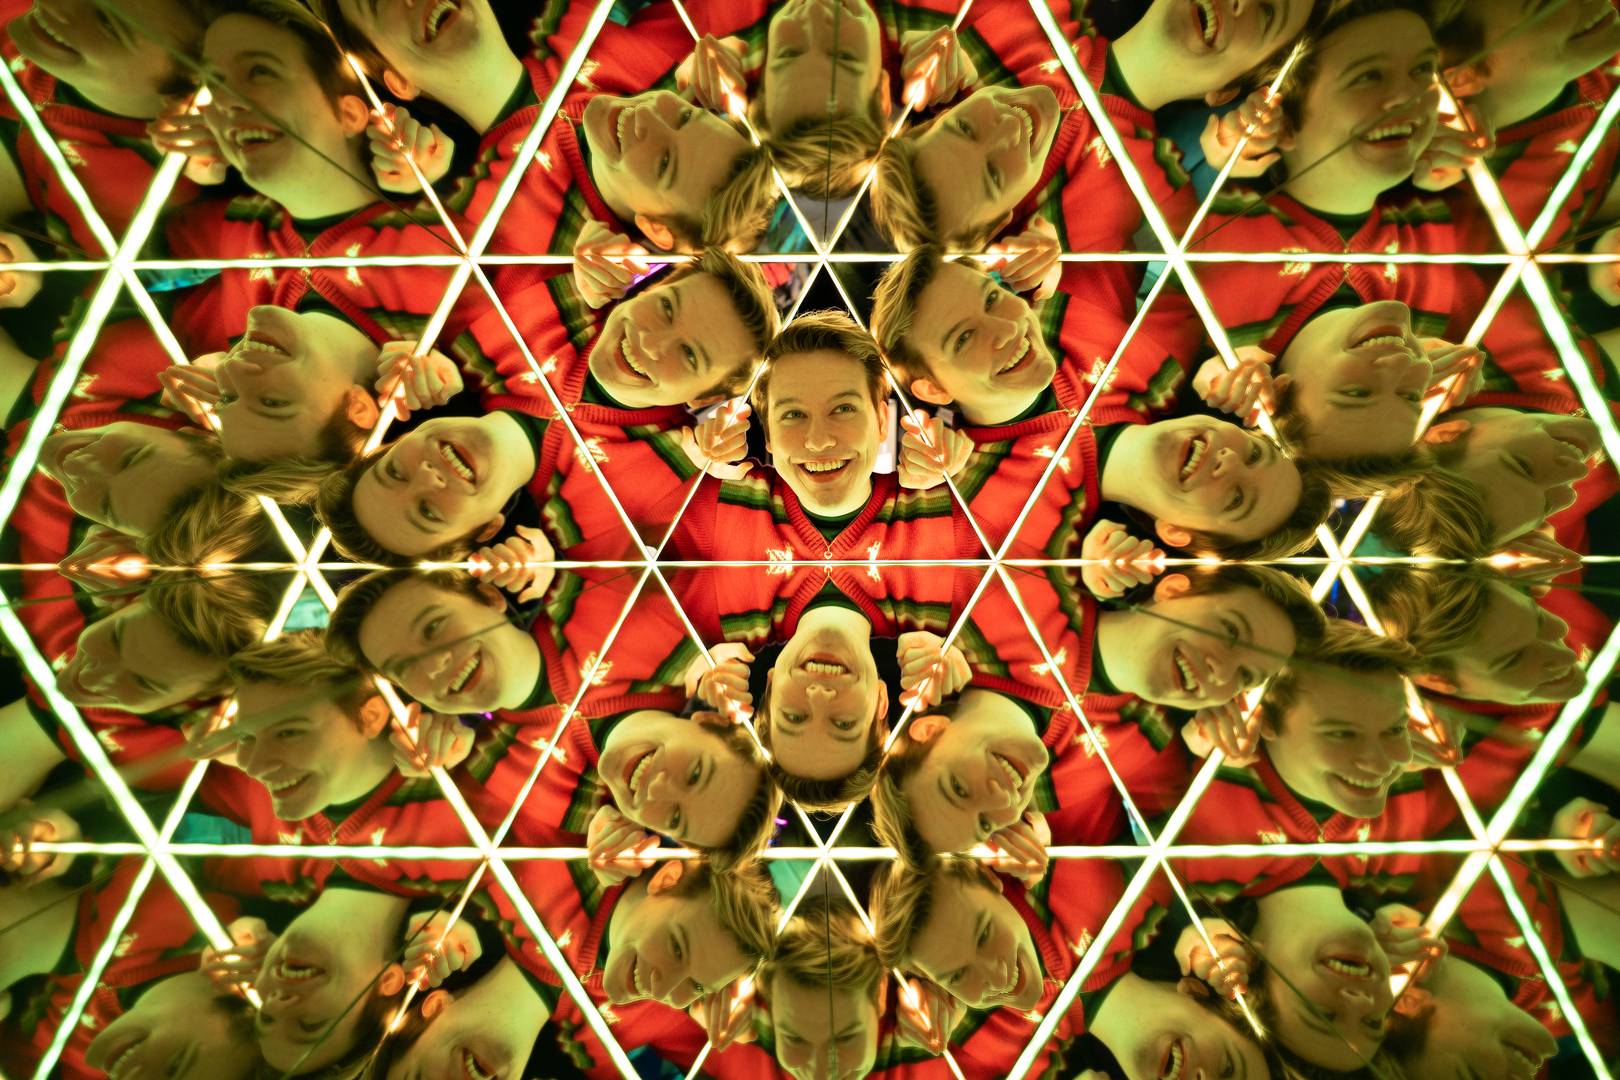 A boys face reflected many times, in the Kaleidohead exhibit at Camera Obscura & World of Illusions, Edinburgh, Camera Obscura & World of Illusions, Edinburgh